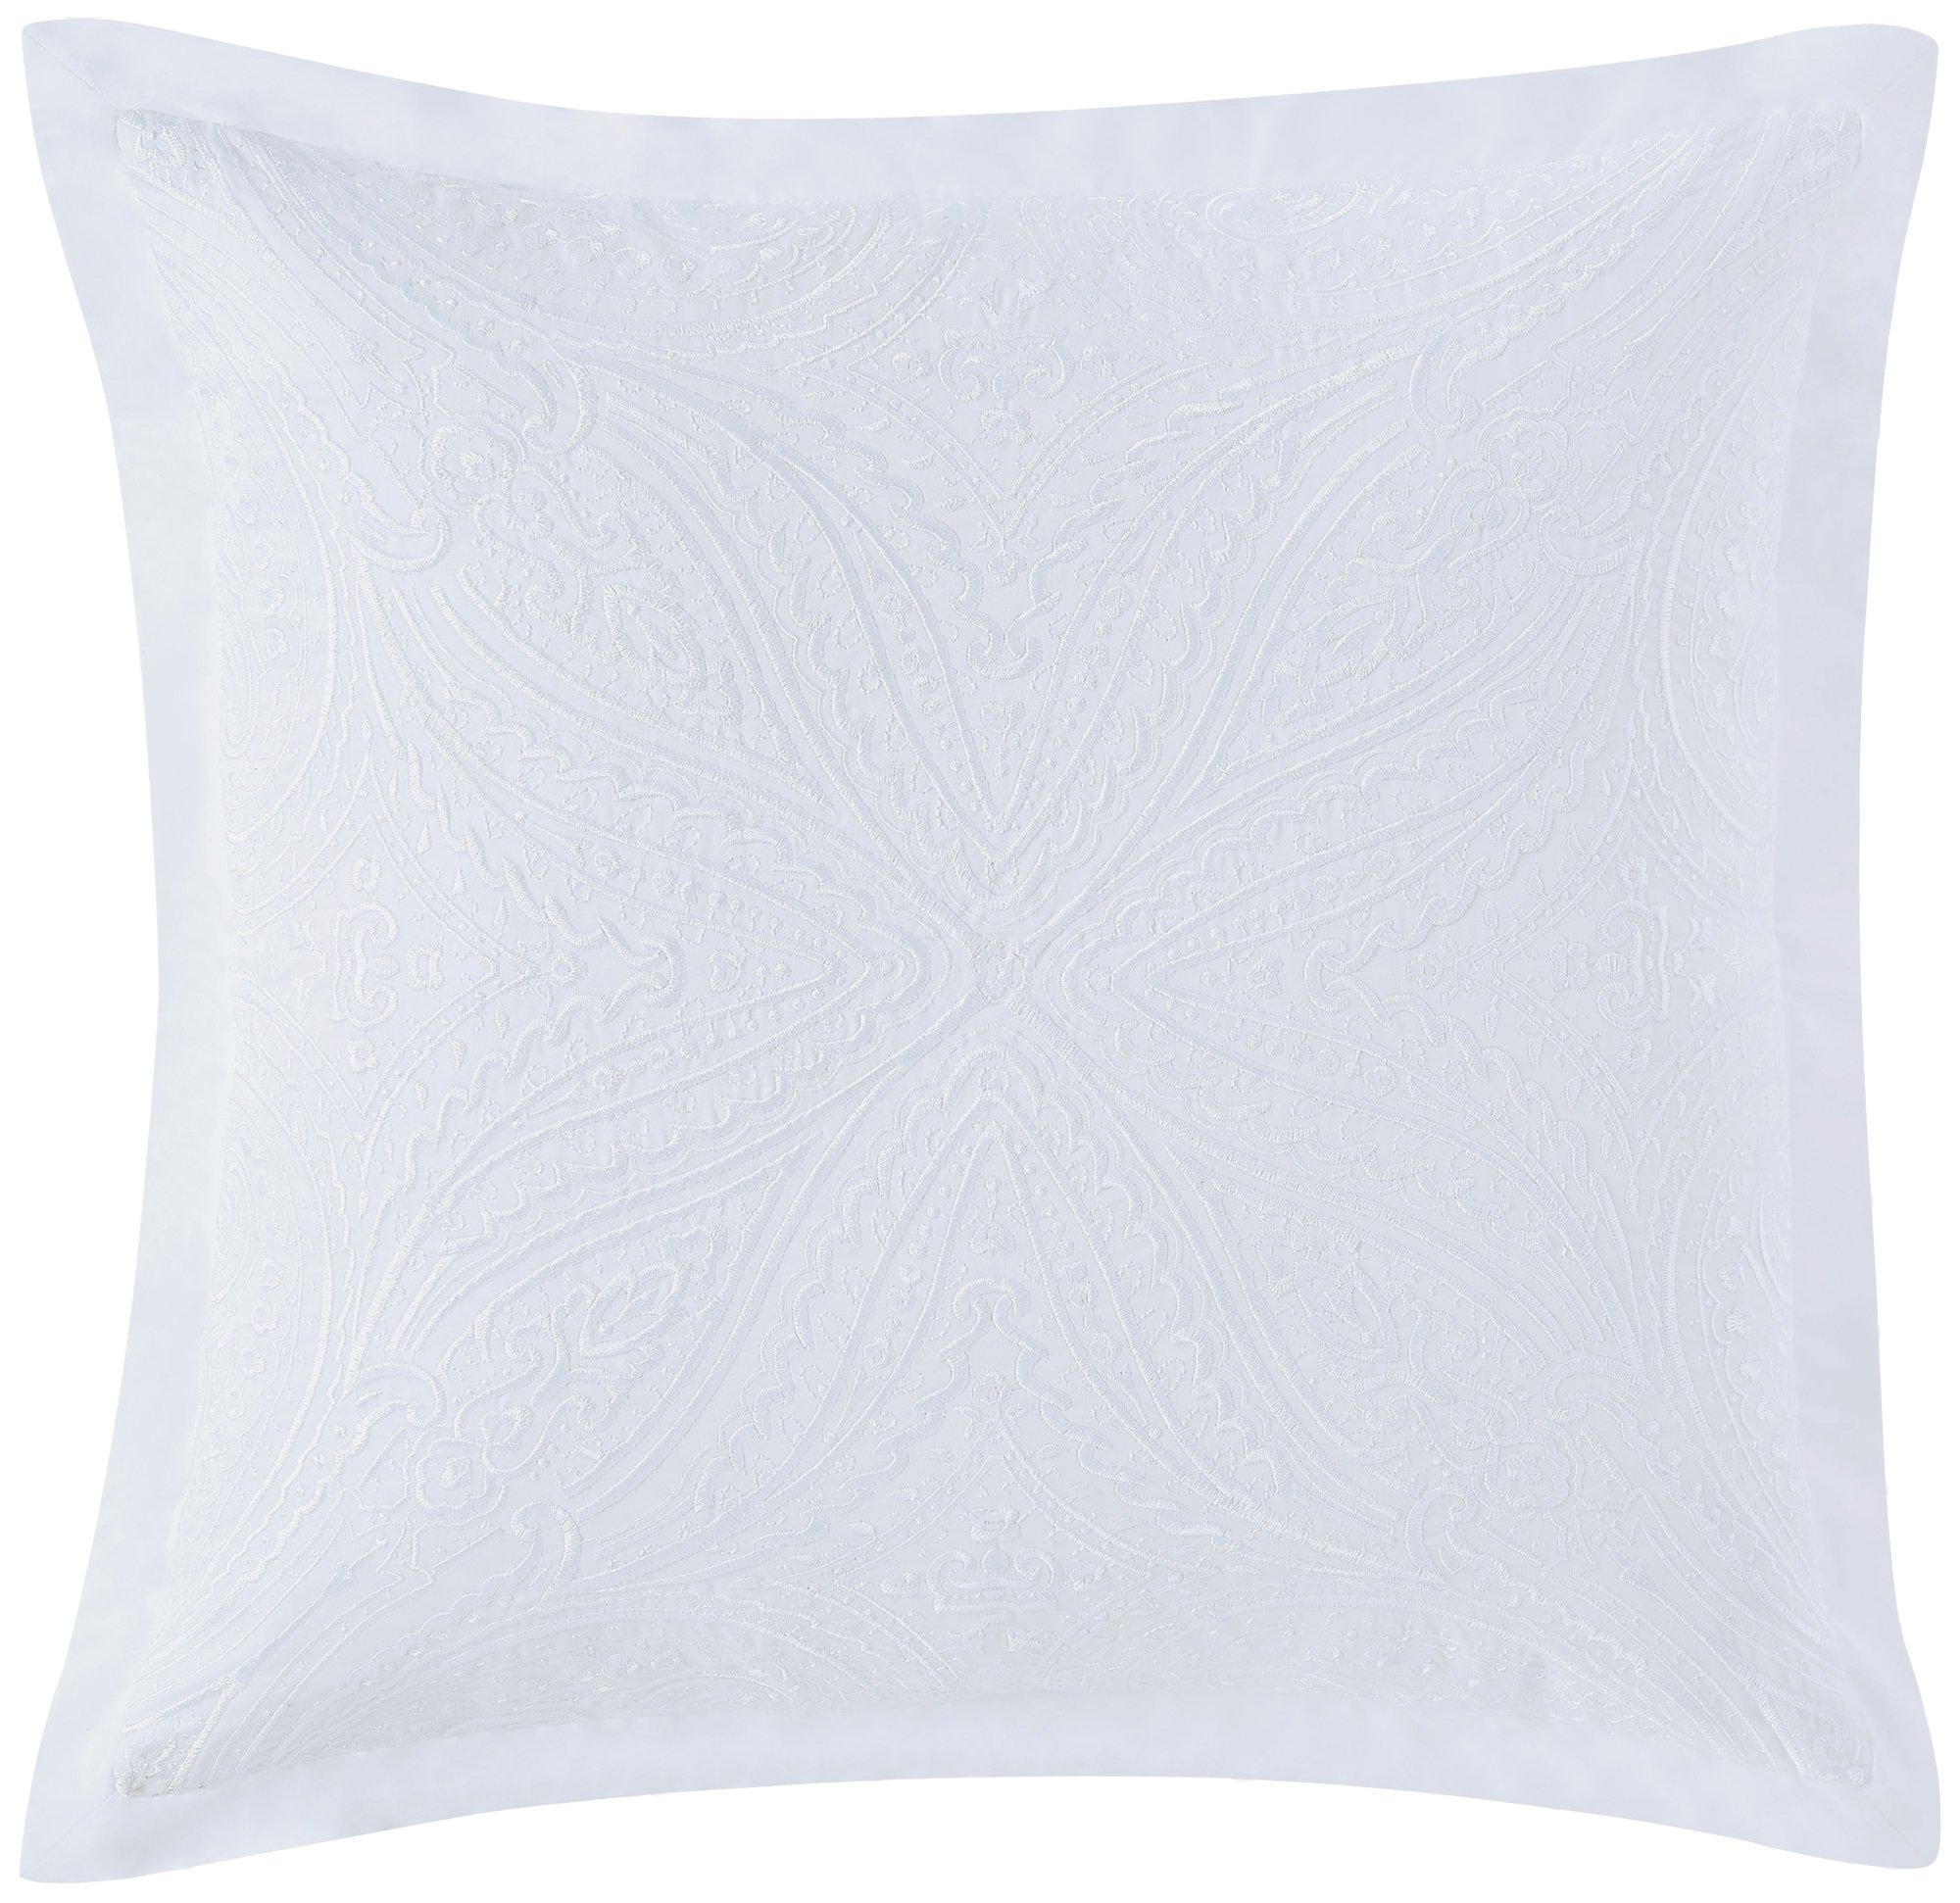 Charisma Home Settee Square Embroidered Decorative Pillow | Bealls Florida